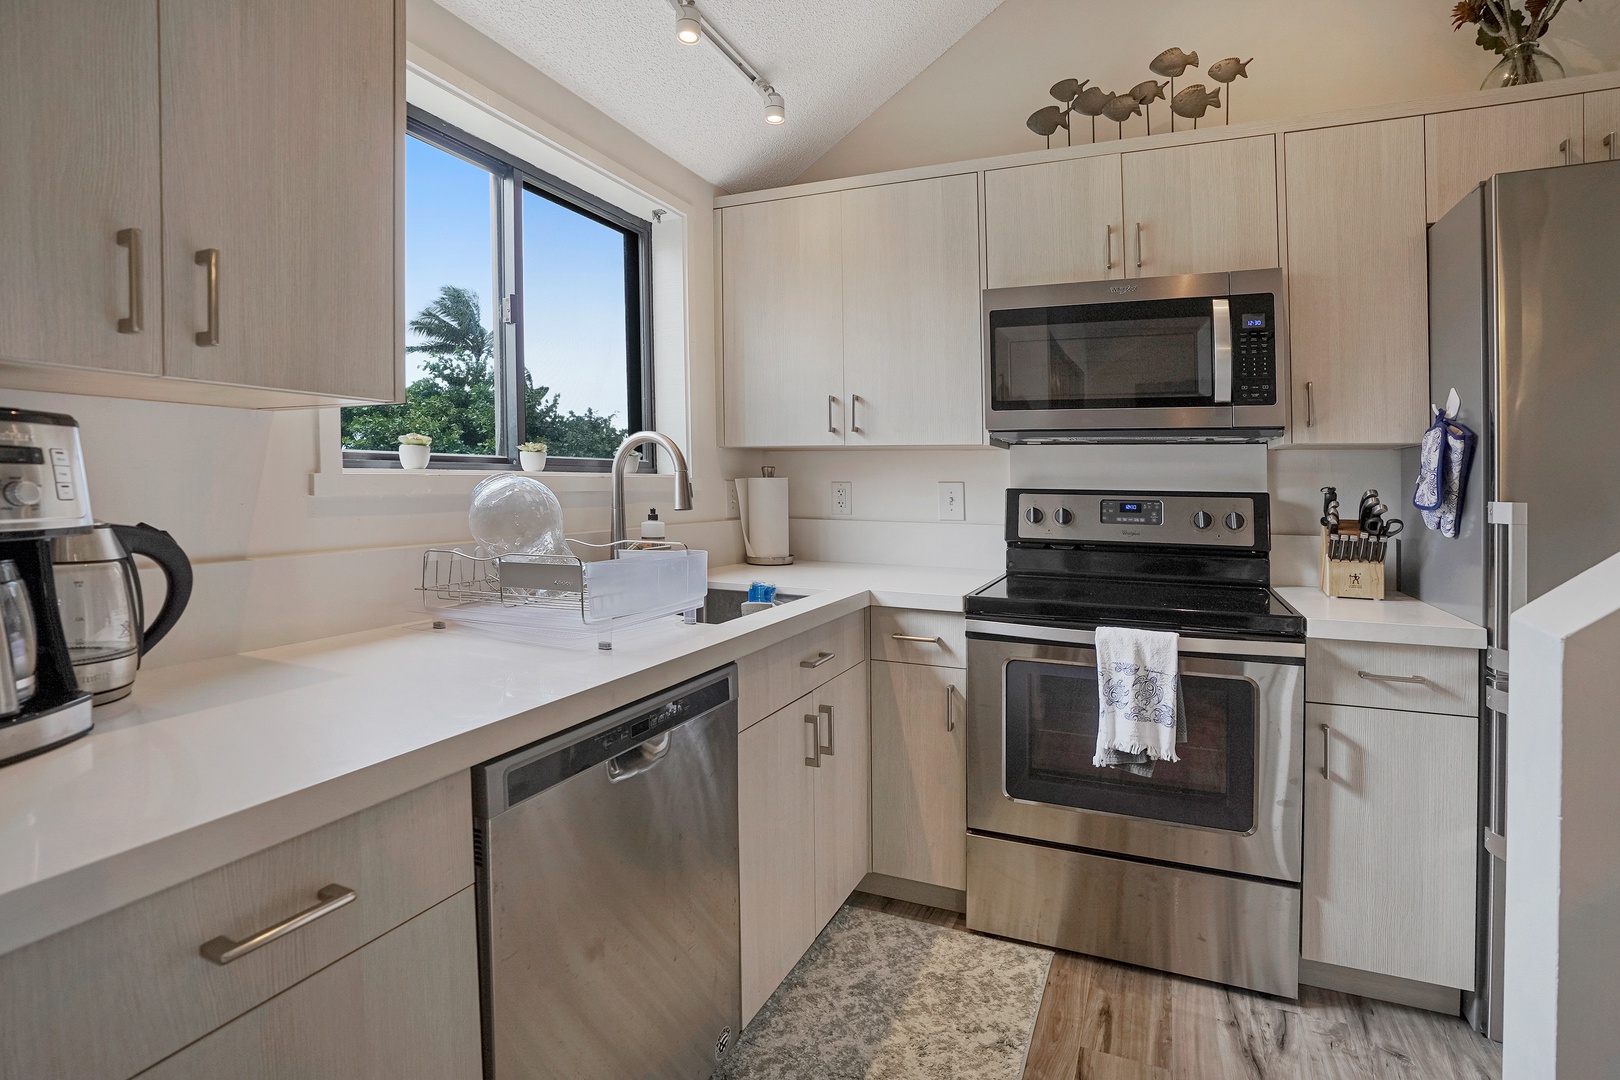 Princeville Vacation Rentals, Sealodge Villa H5 - The updated kitchen has stainless steel appliances